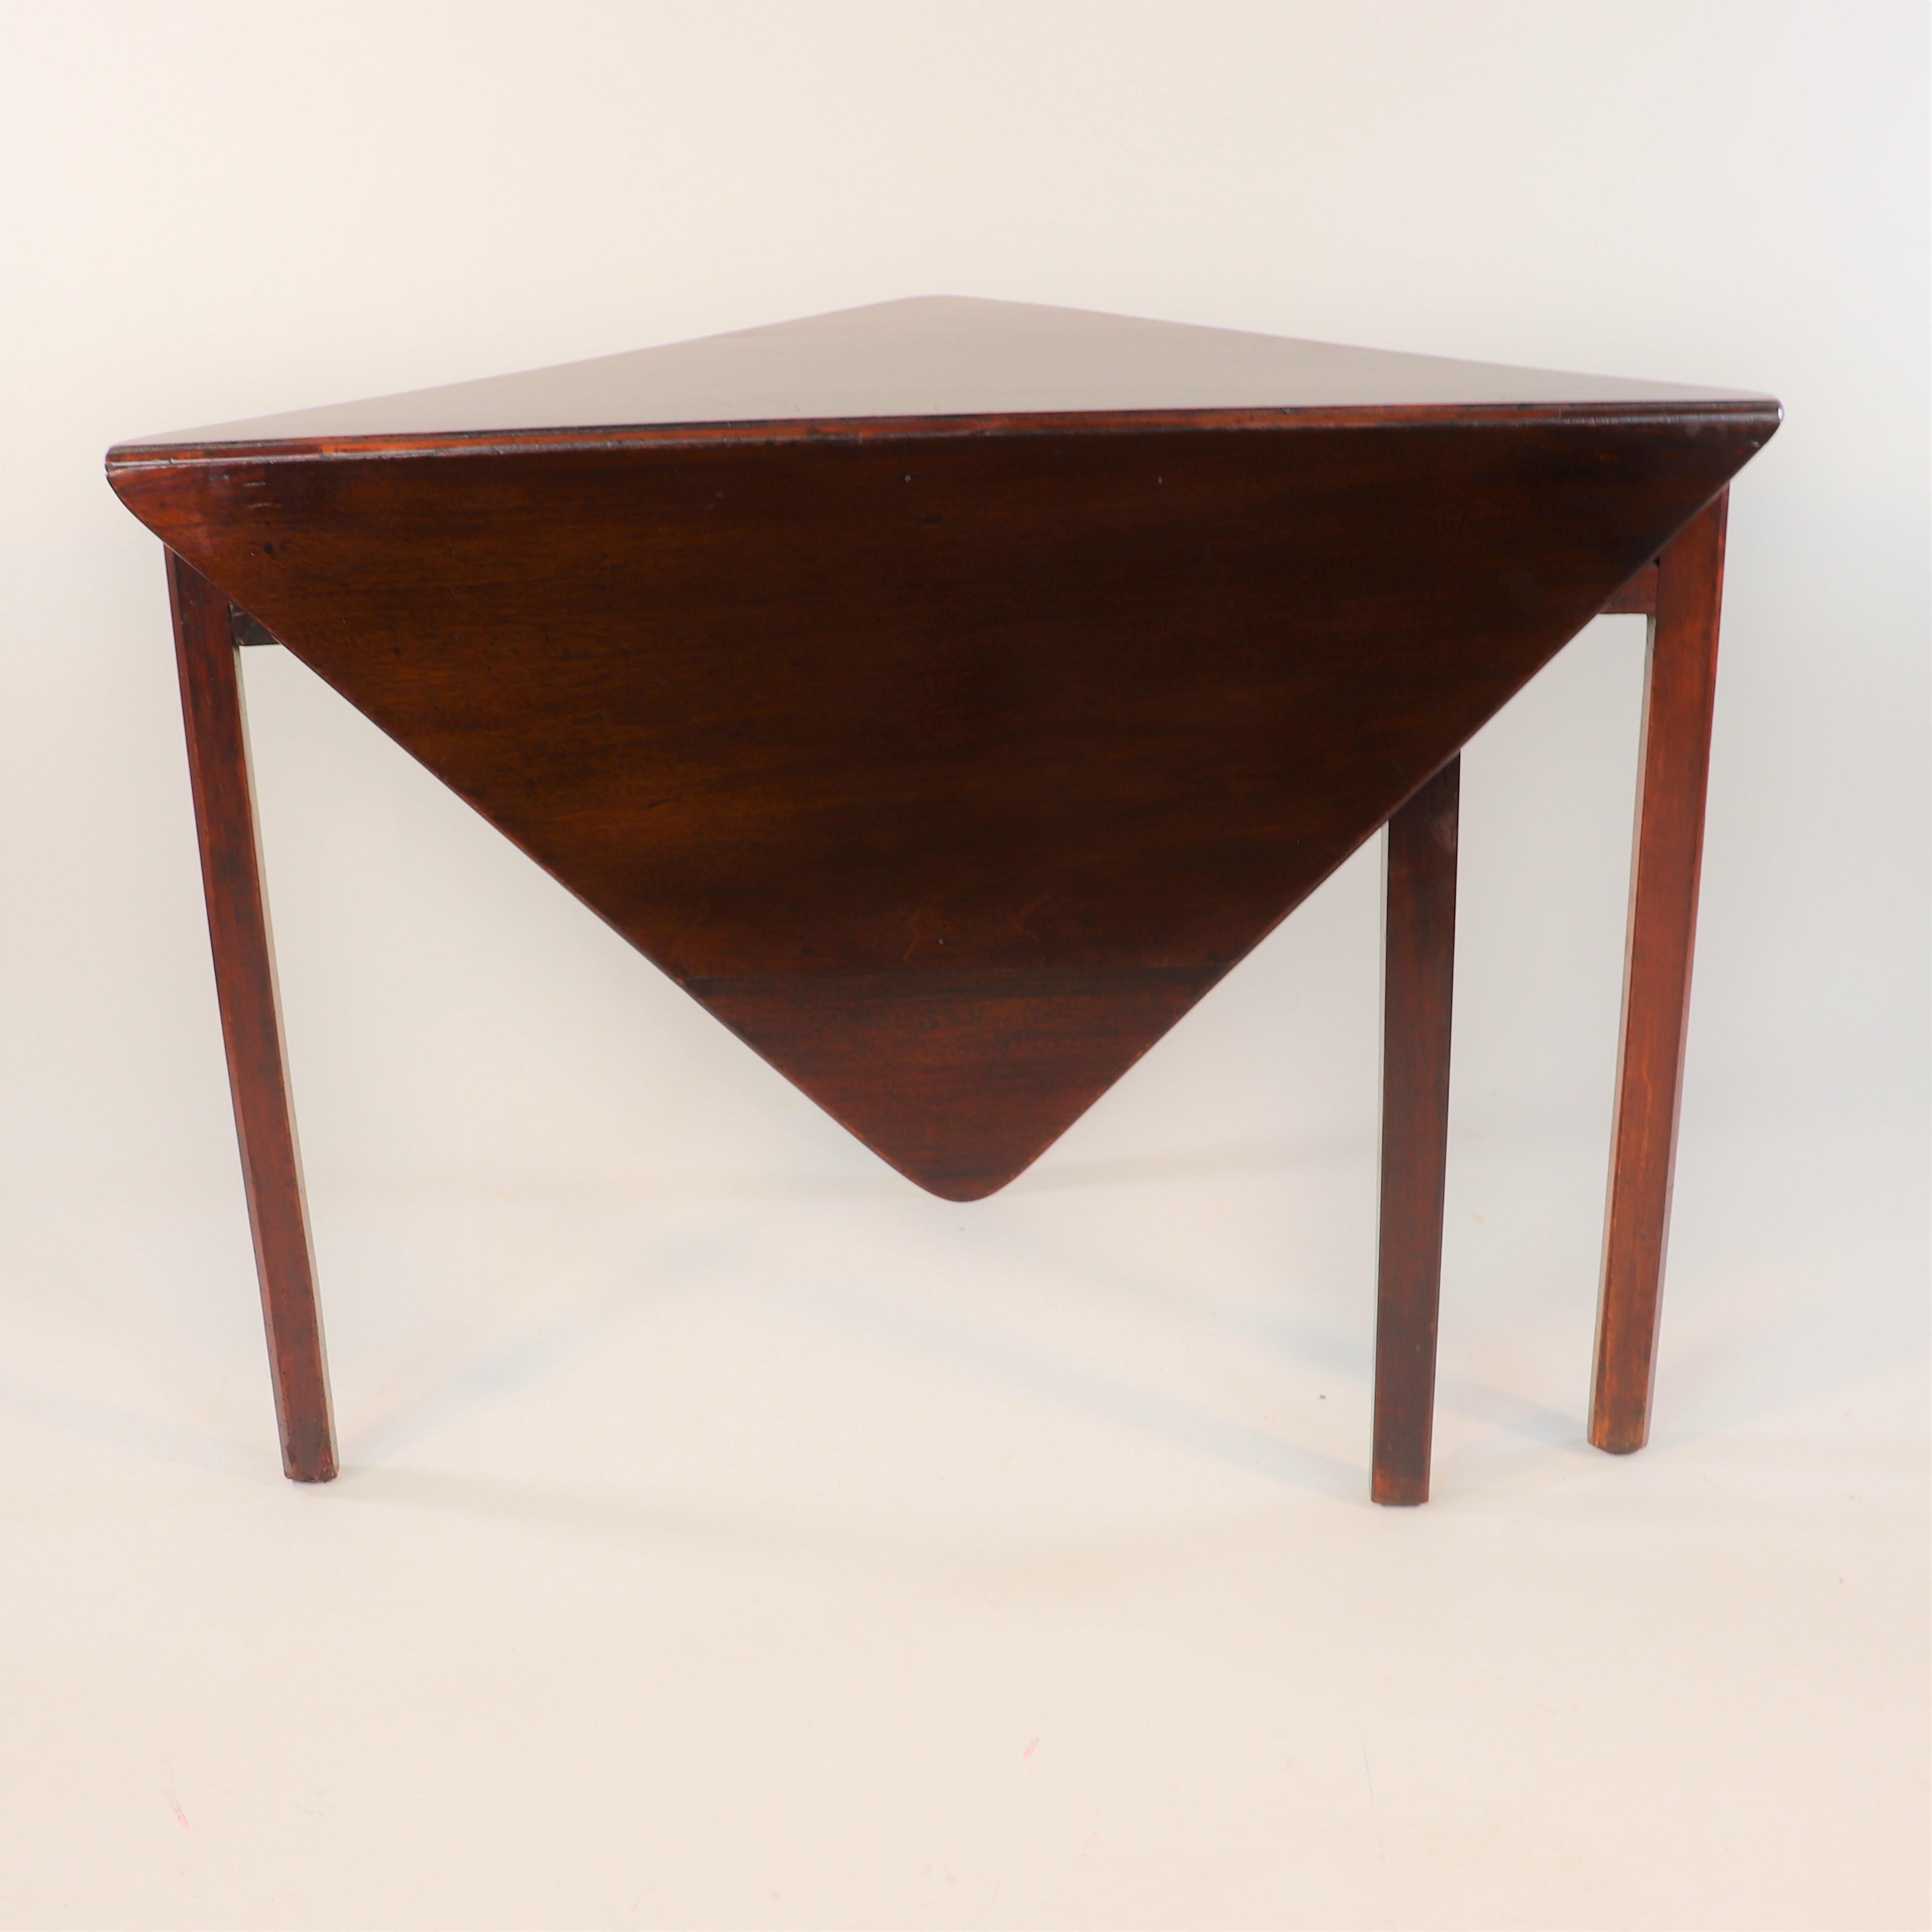 This is an elegant hand-crafted mahogany George III multifunctionality corner table. During this time, corner tables became popular, due to their multi-functional and space-saving characteristics. They easily transform into a square multi-use: tea